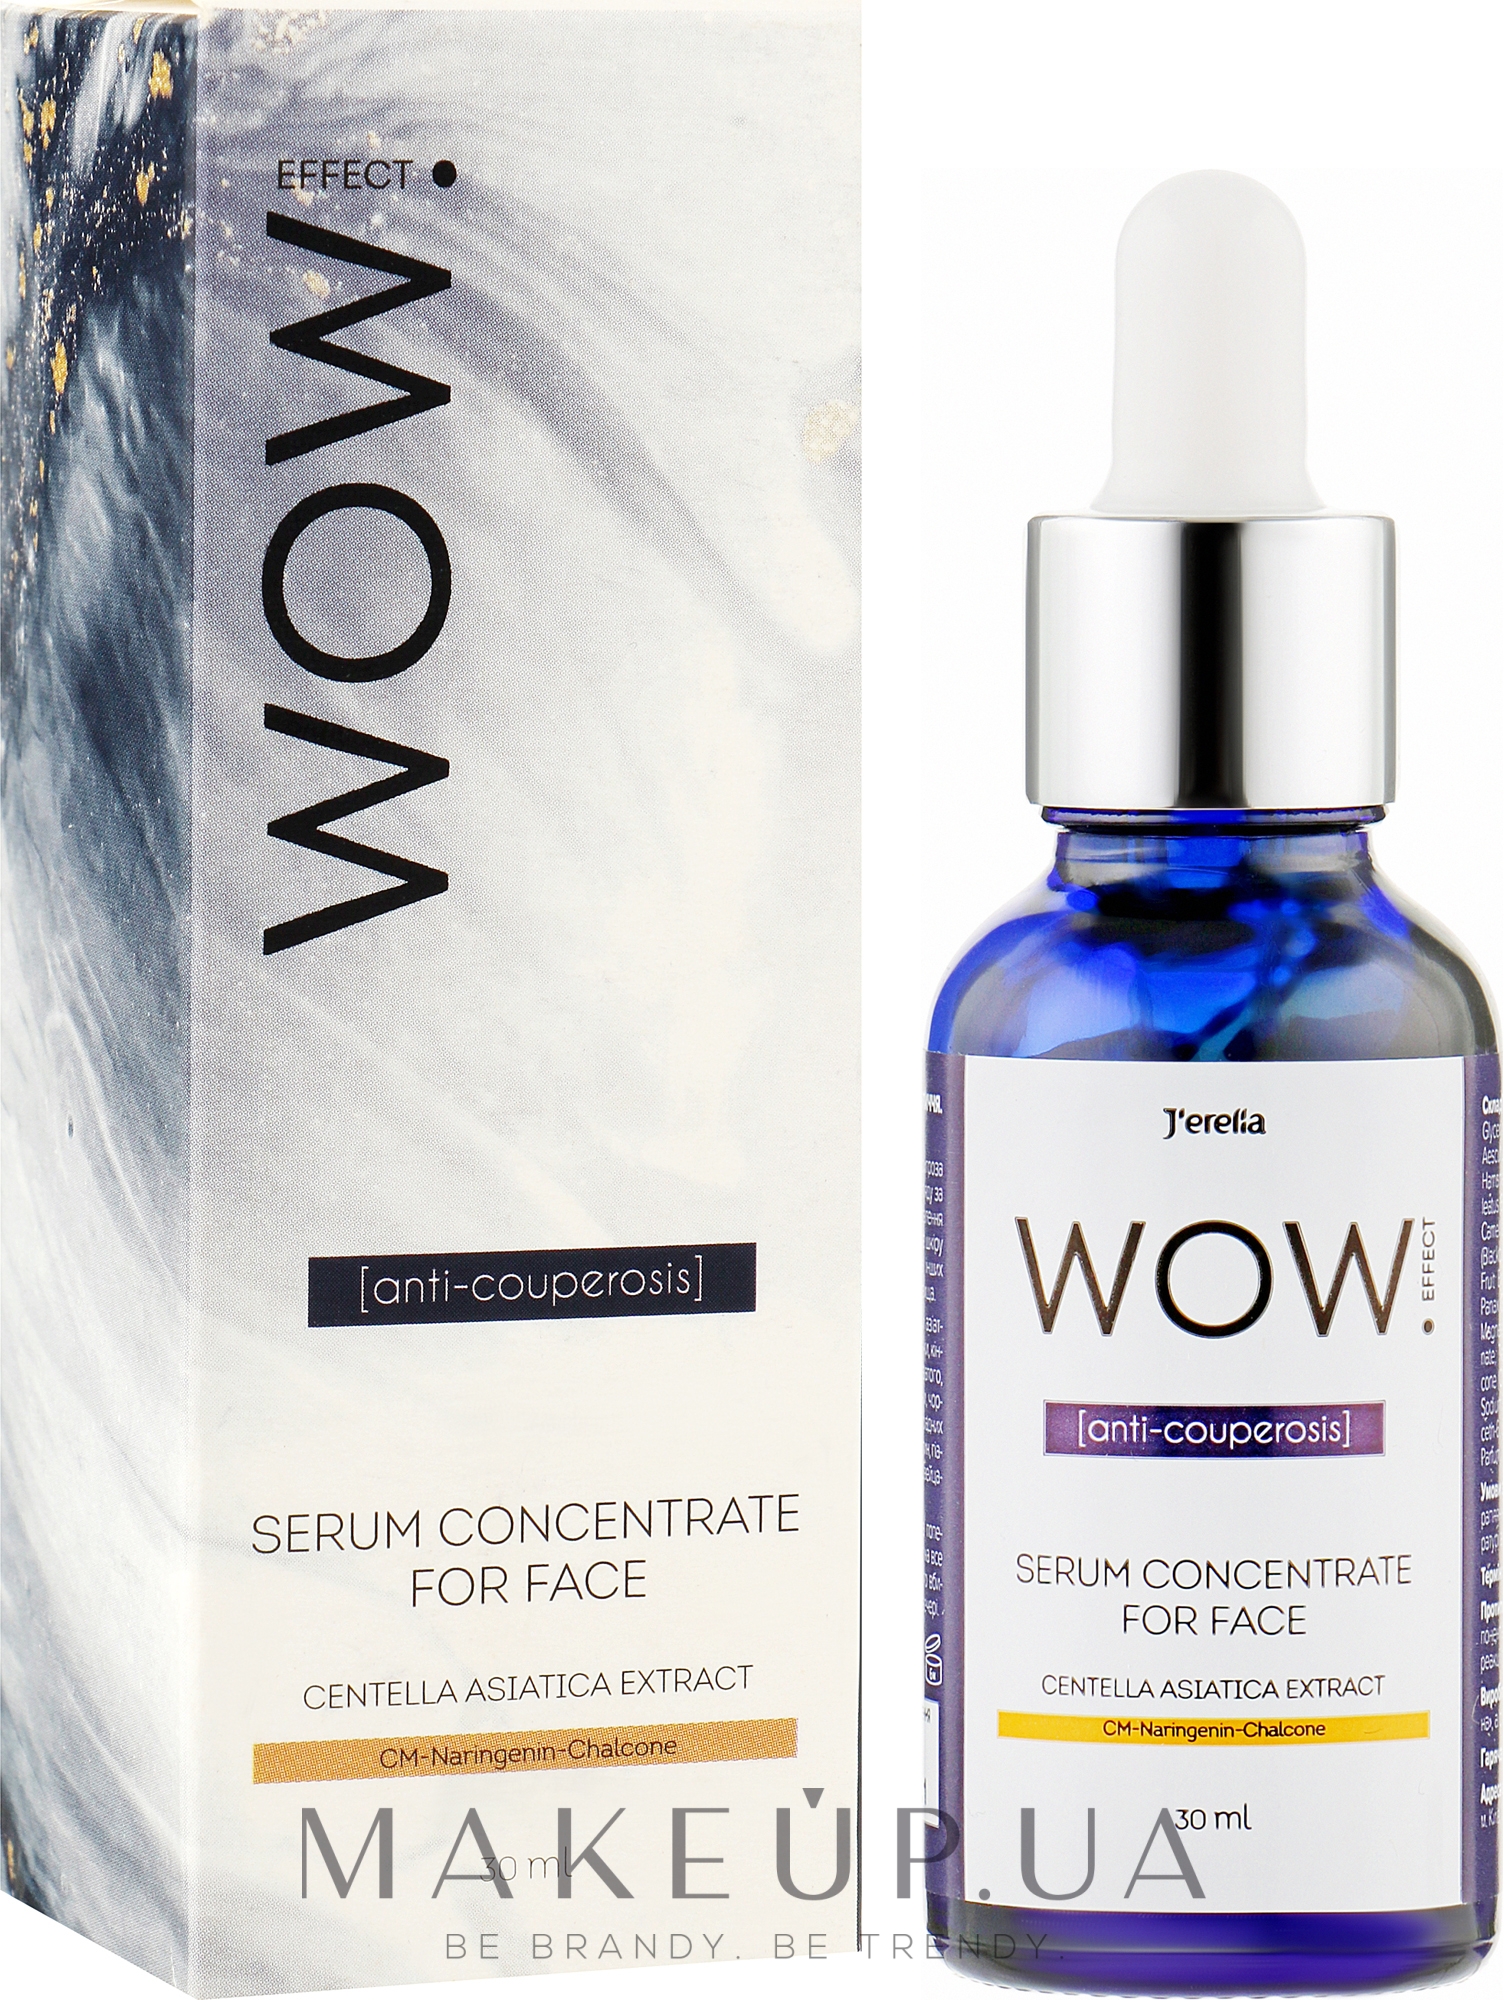 Serum Concentrate for Face "Anti-Couperosis" - J'erelia WOW Effect Serum Concentrate For Face Anti-Couperasls — фото 30ml